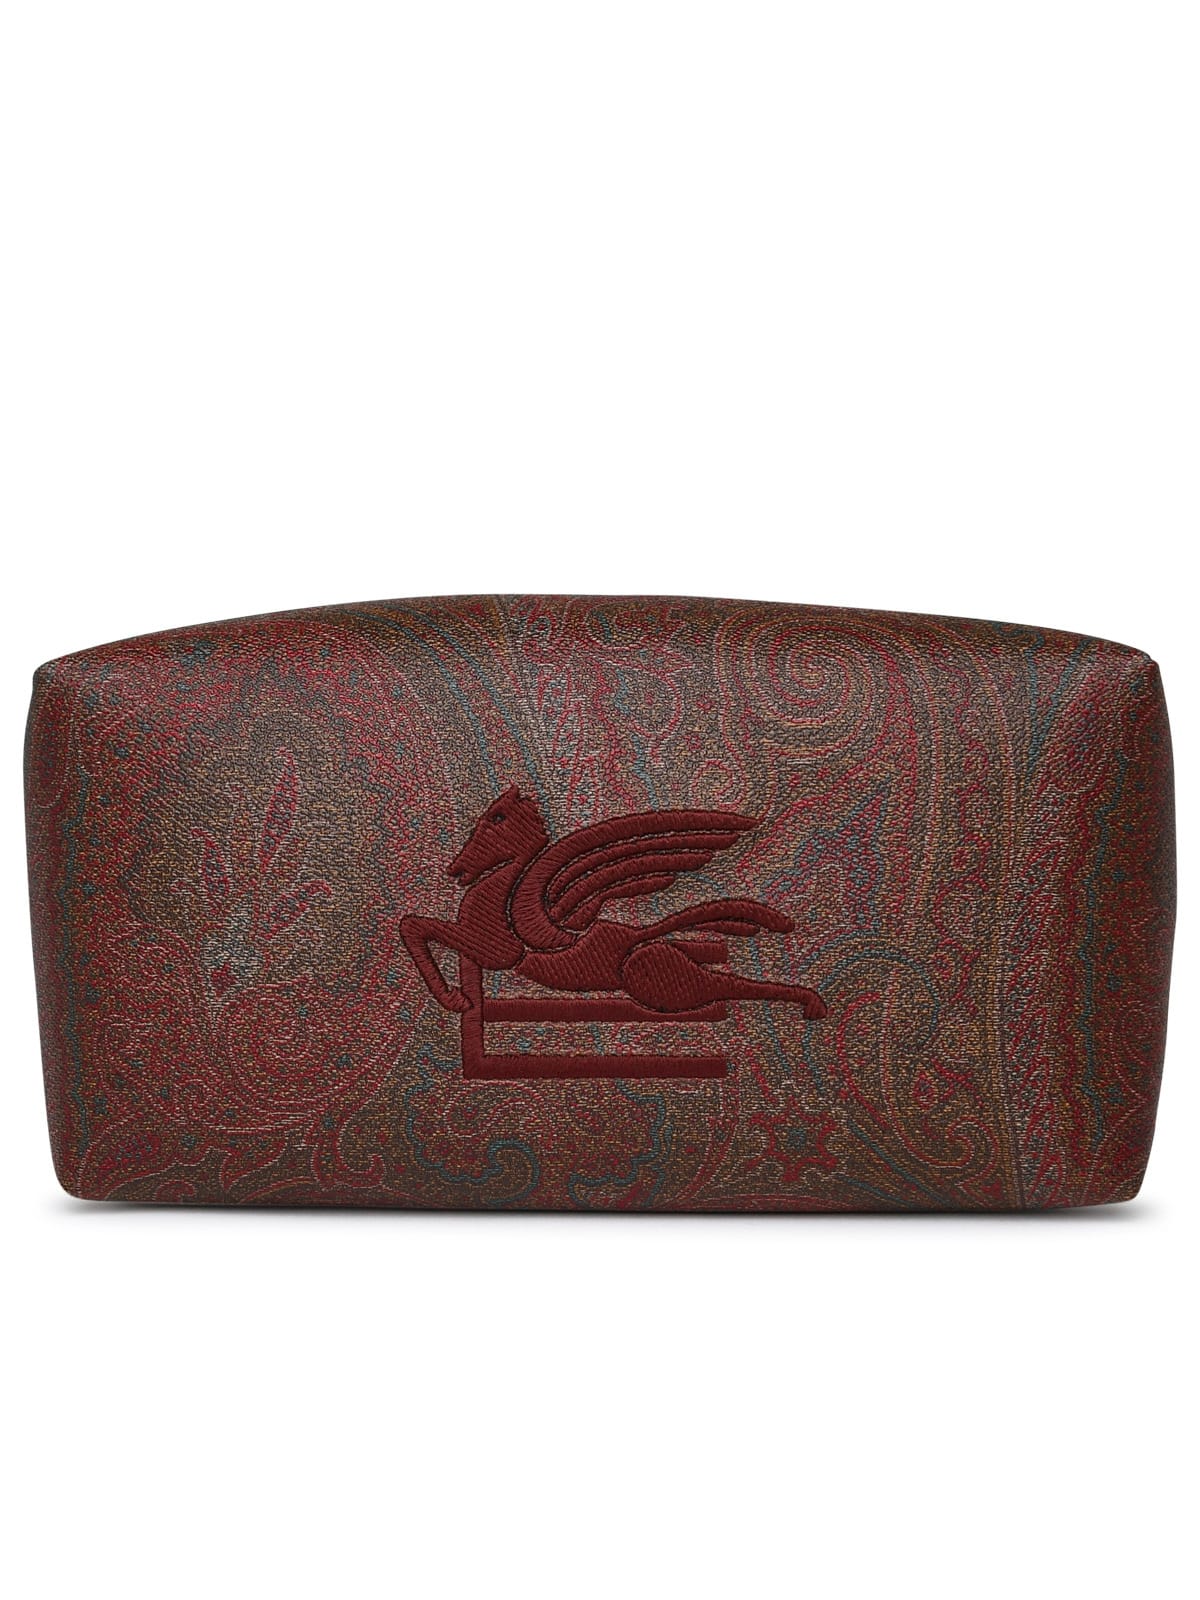 Paisley Beauty Case In Brown Cotton Blend